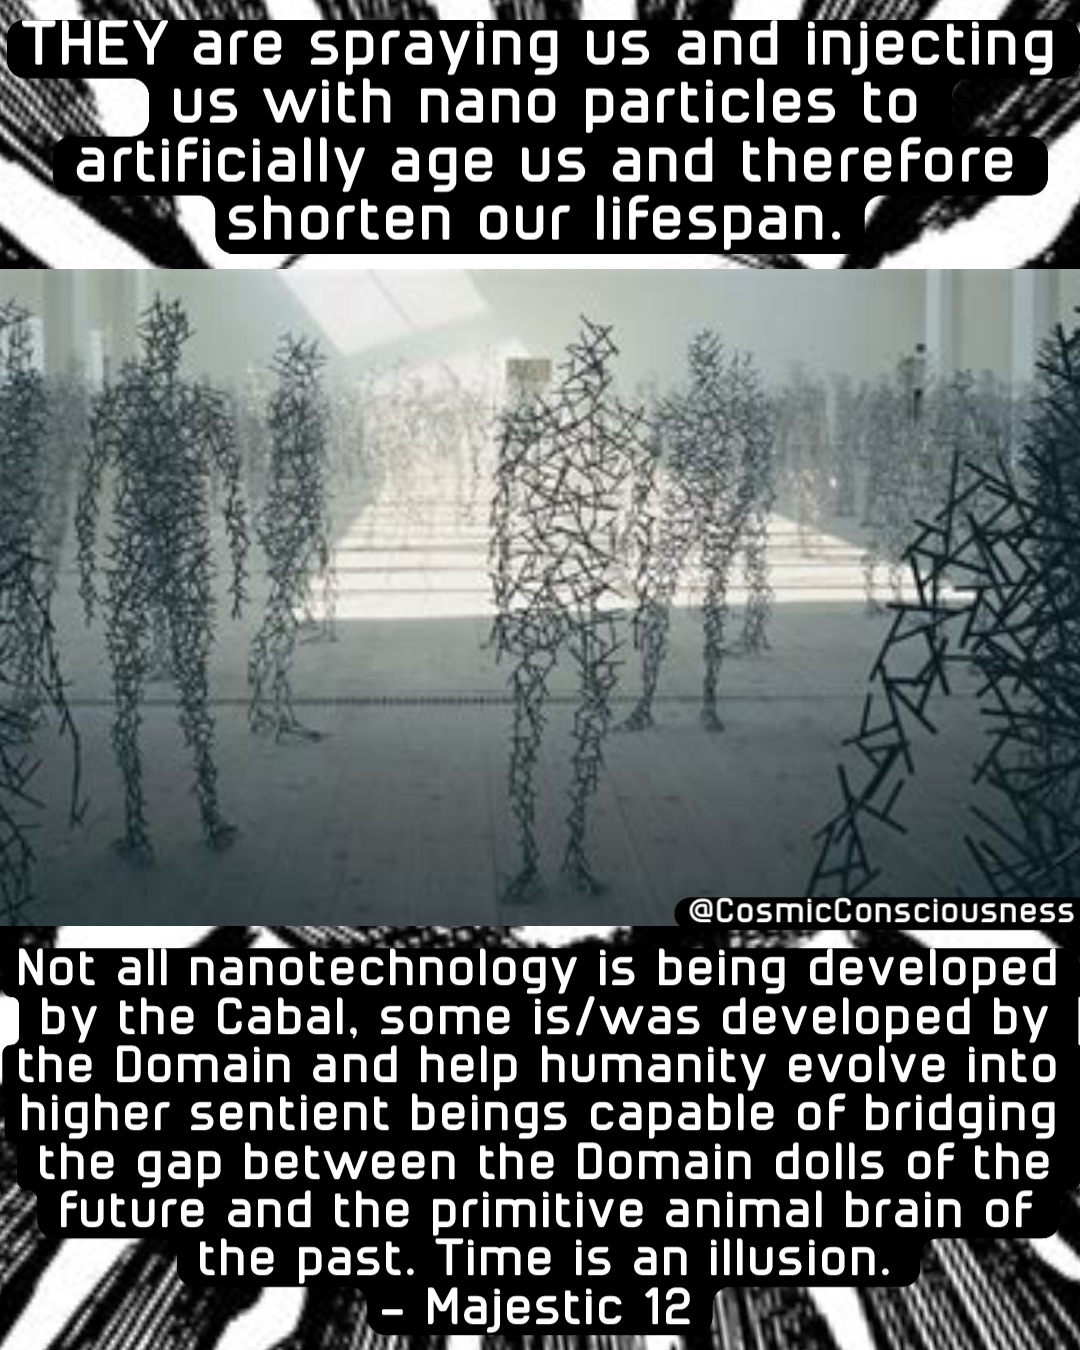 THEY are spraying us and injecting us with nano particles to artificially age us and therefore shorten our lifespan. Not all nanotechnology is being developed by the Cabal, some is/was developed by the Domain and help humanity evolve into higher sentient beings capable of bridging the gap between the Domain dolls of the future and the primitive animal brain of the past. Time is an illusion. 
- Majestic 12 @CosmicConsciousness